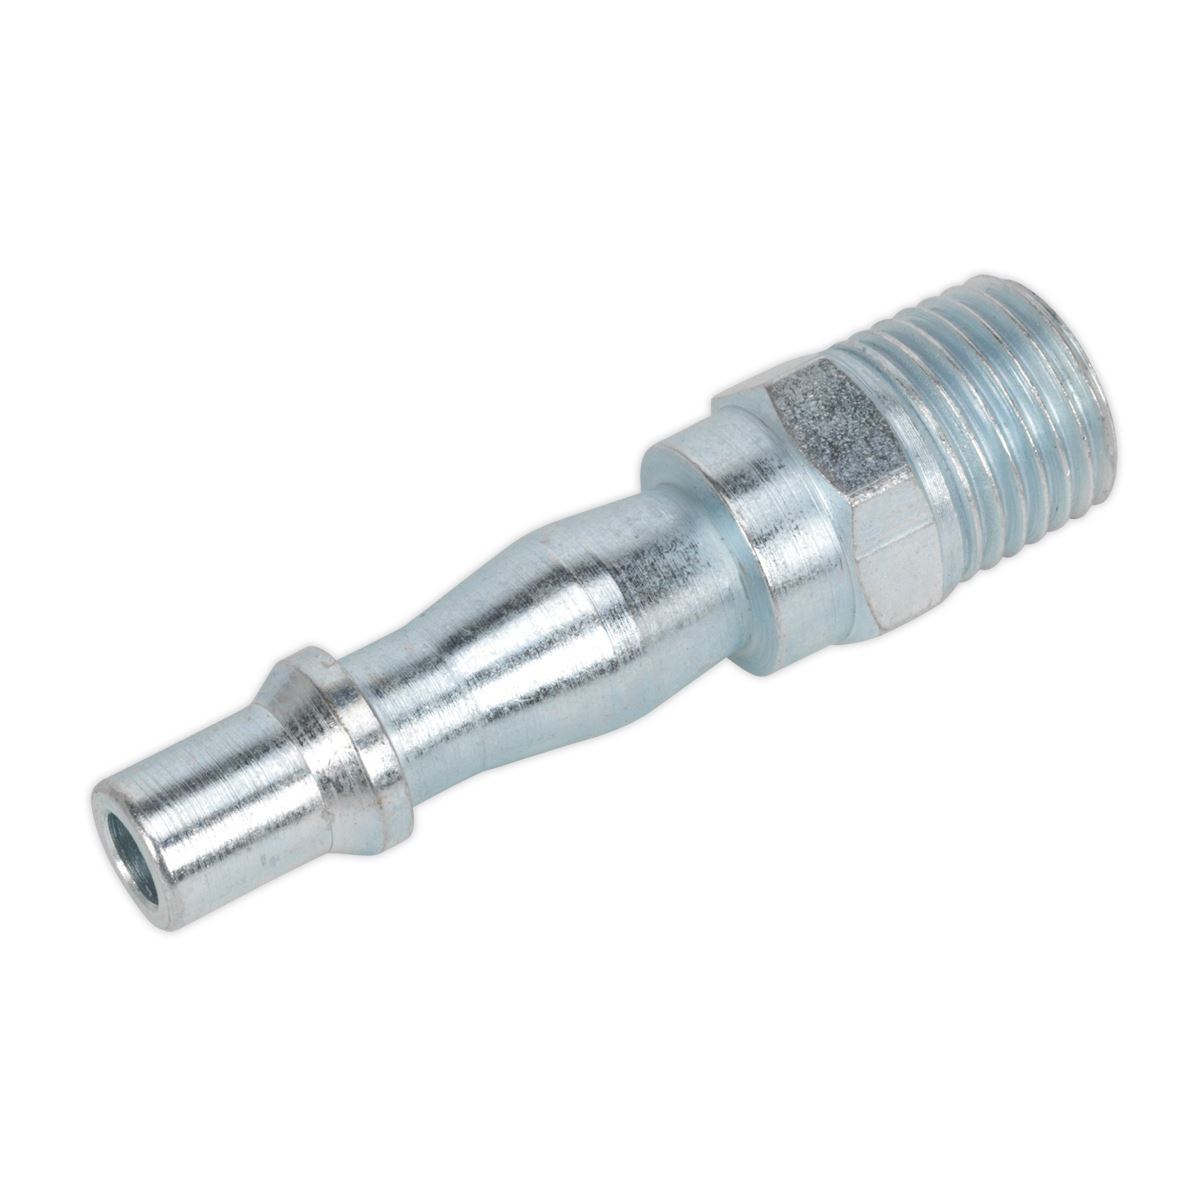 PCL Screwed Adaptor Male 1/4"BSPT Pack of 15